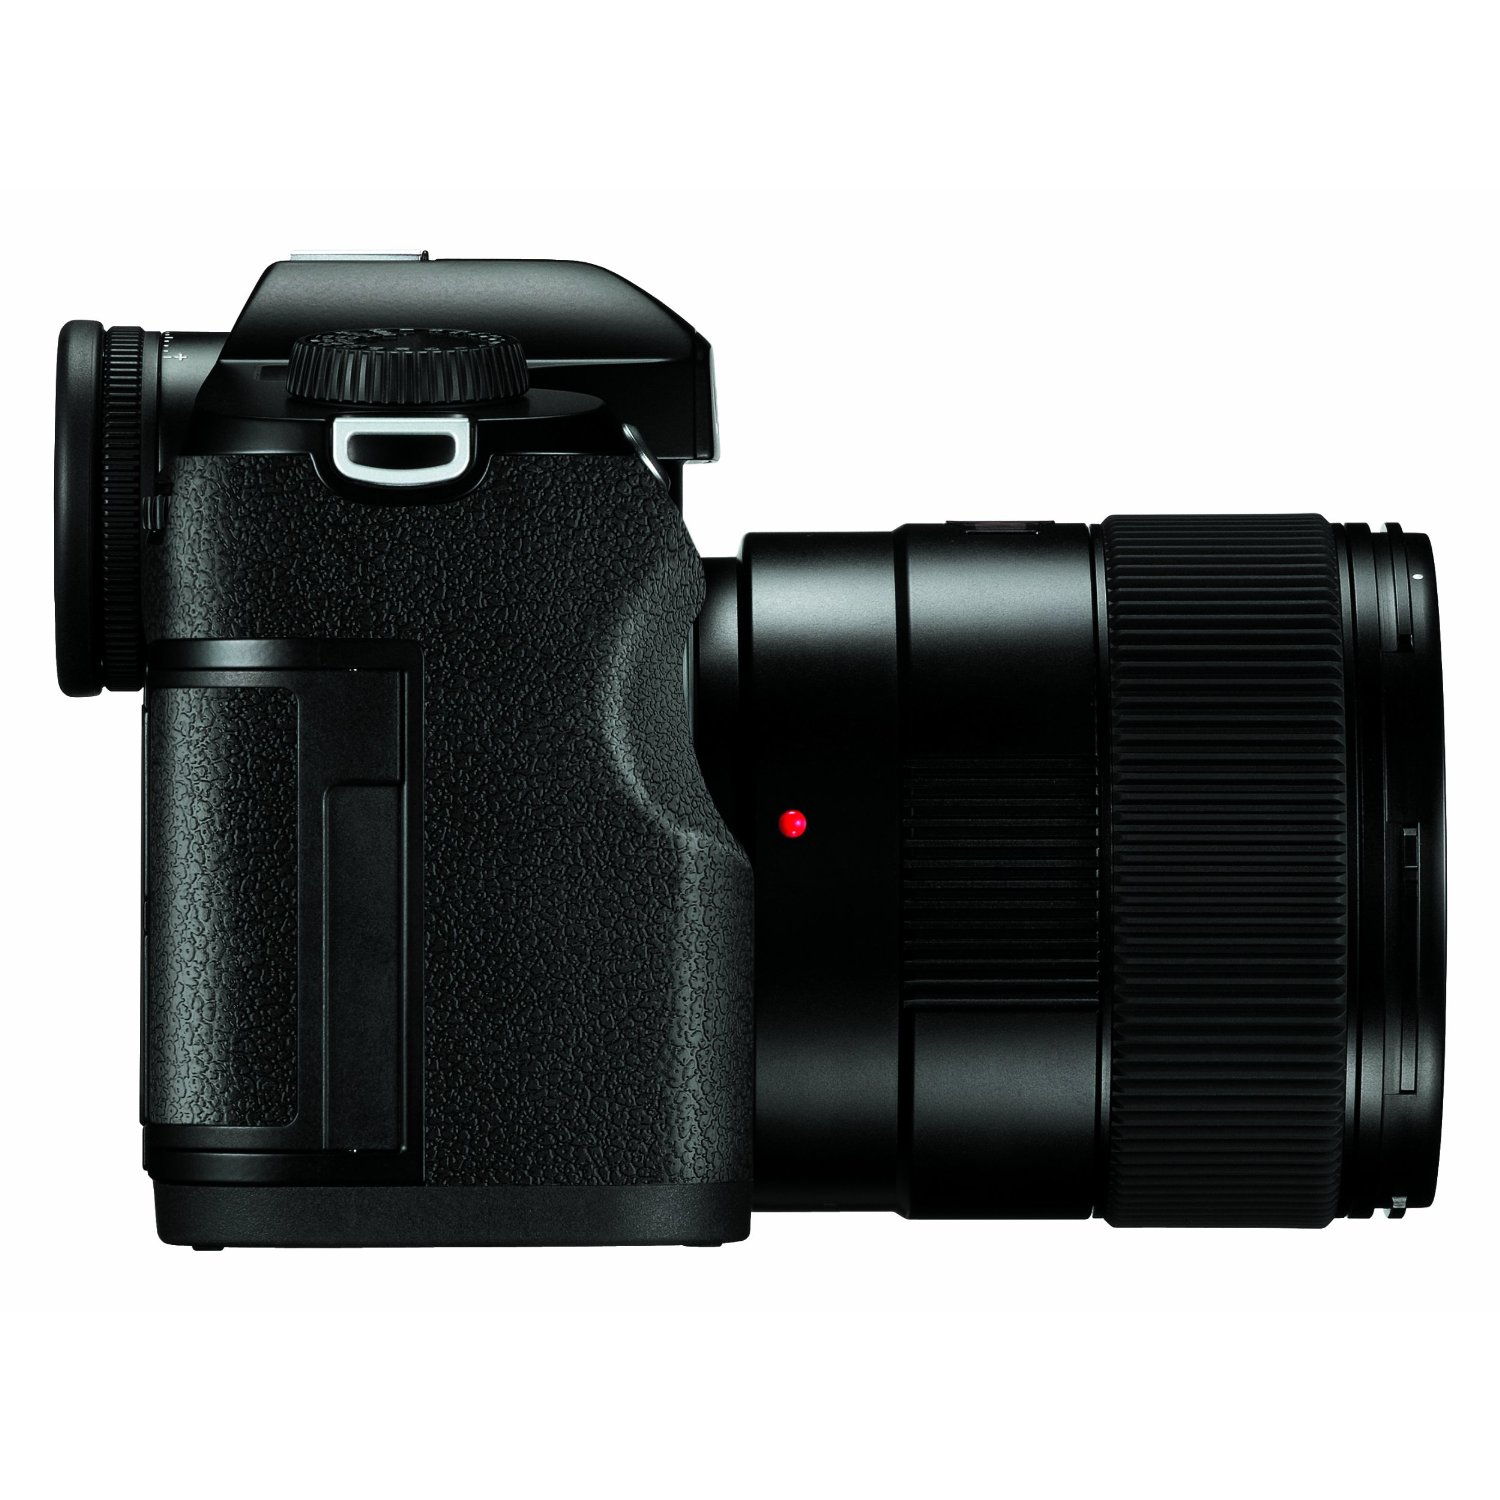 http://thetechjournal.com/wp-content/uploads/images/1109/1316325950-leica-s2-375mp-interchangeable-lens-camera-cost-28000-5.jpg